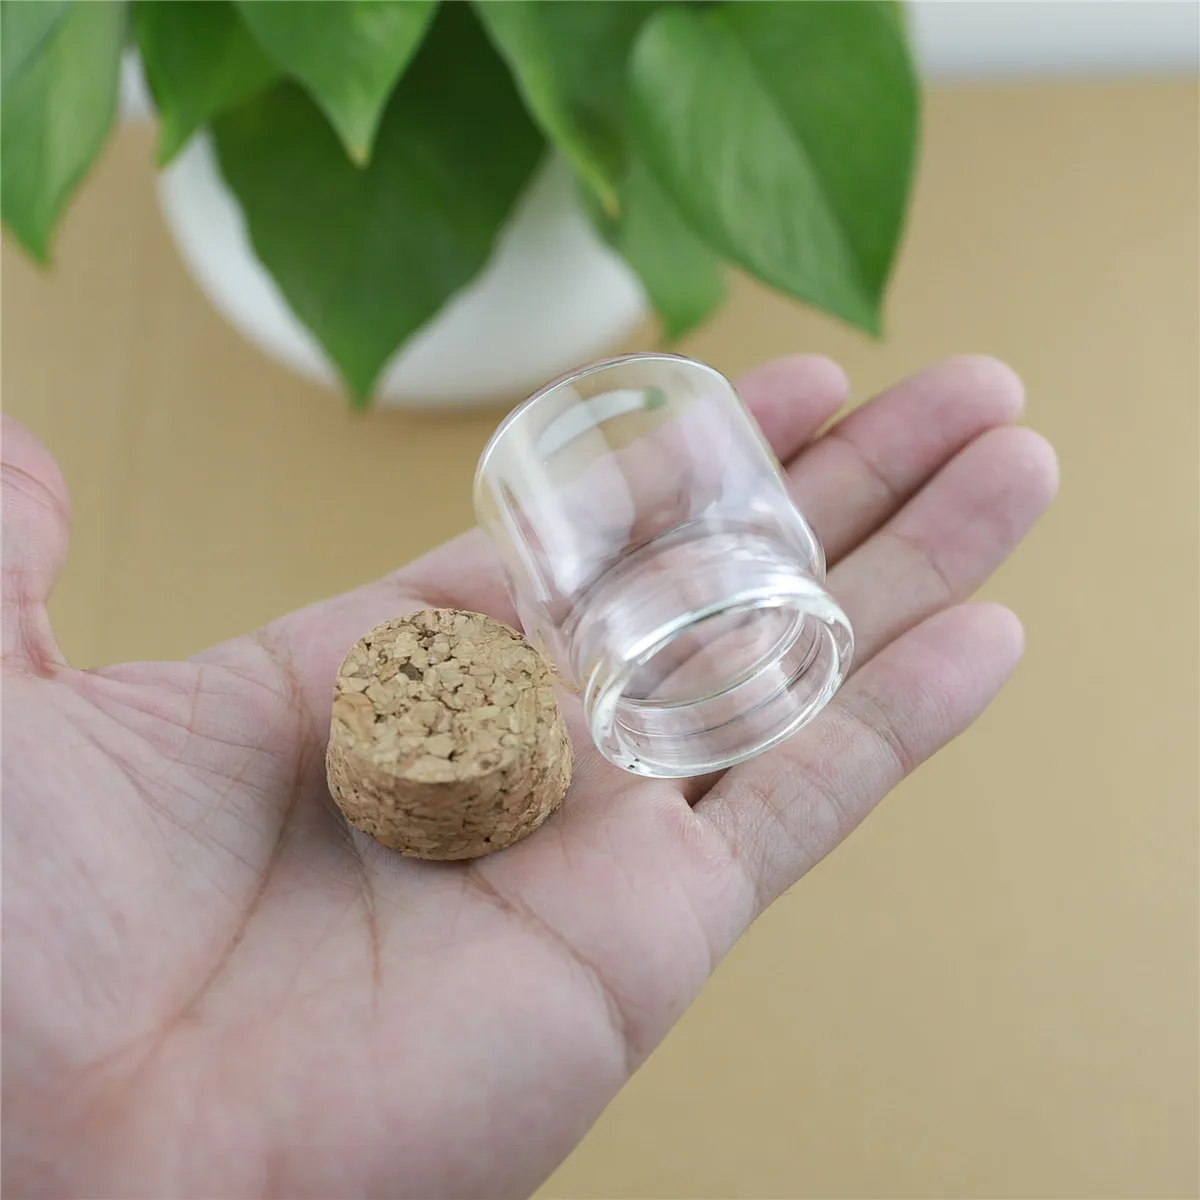 

24PCS/lot 37*40mm 25ml Mini Glass Bottles Spice Storage Jars Corks spicy Bottle Containers tiny jars Vials With Cork Stopper